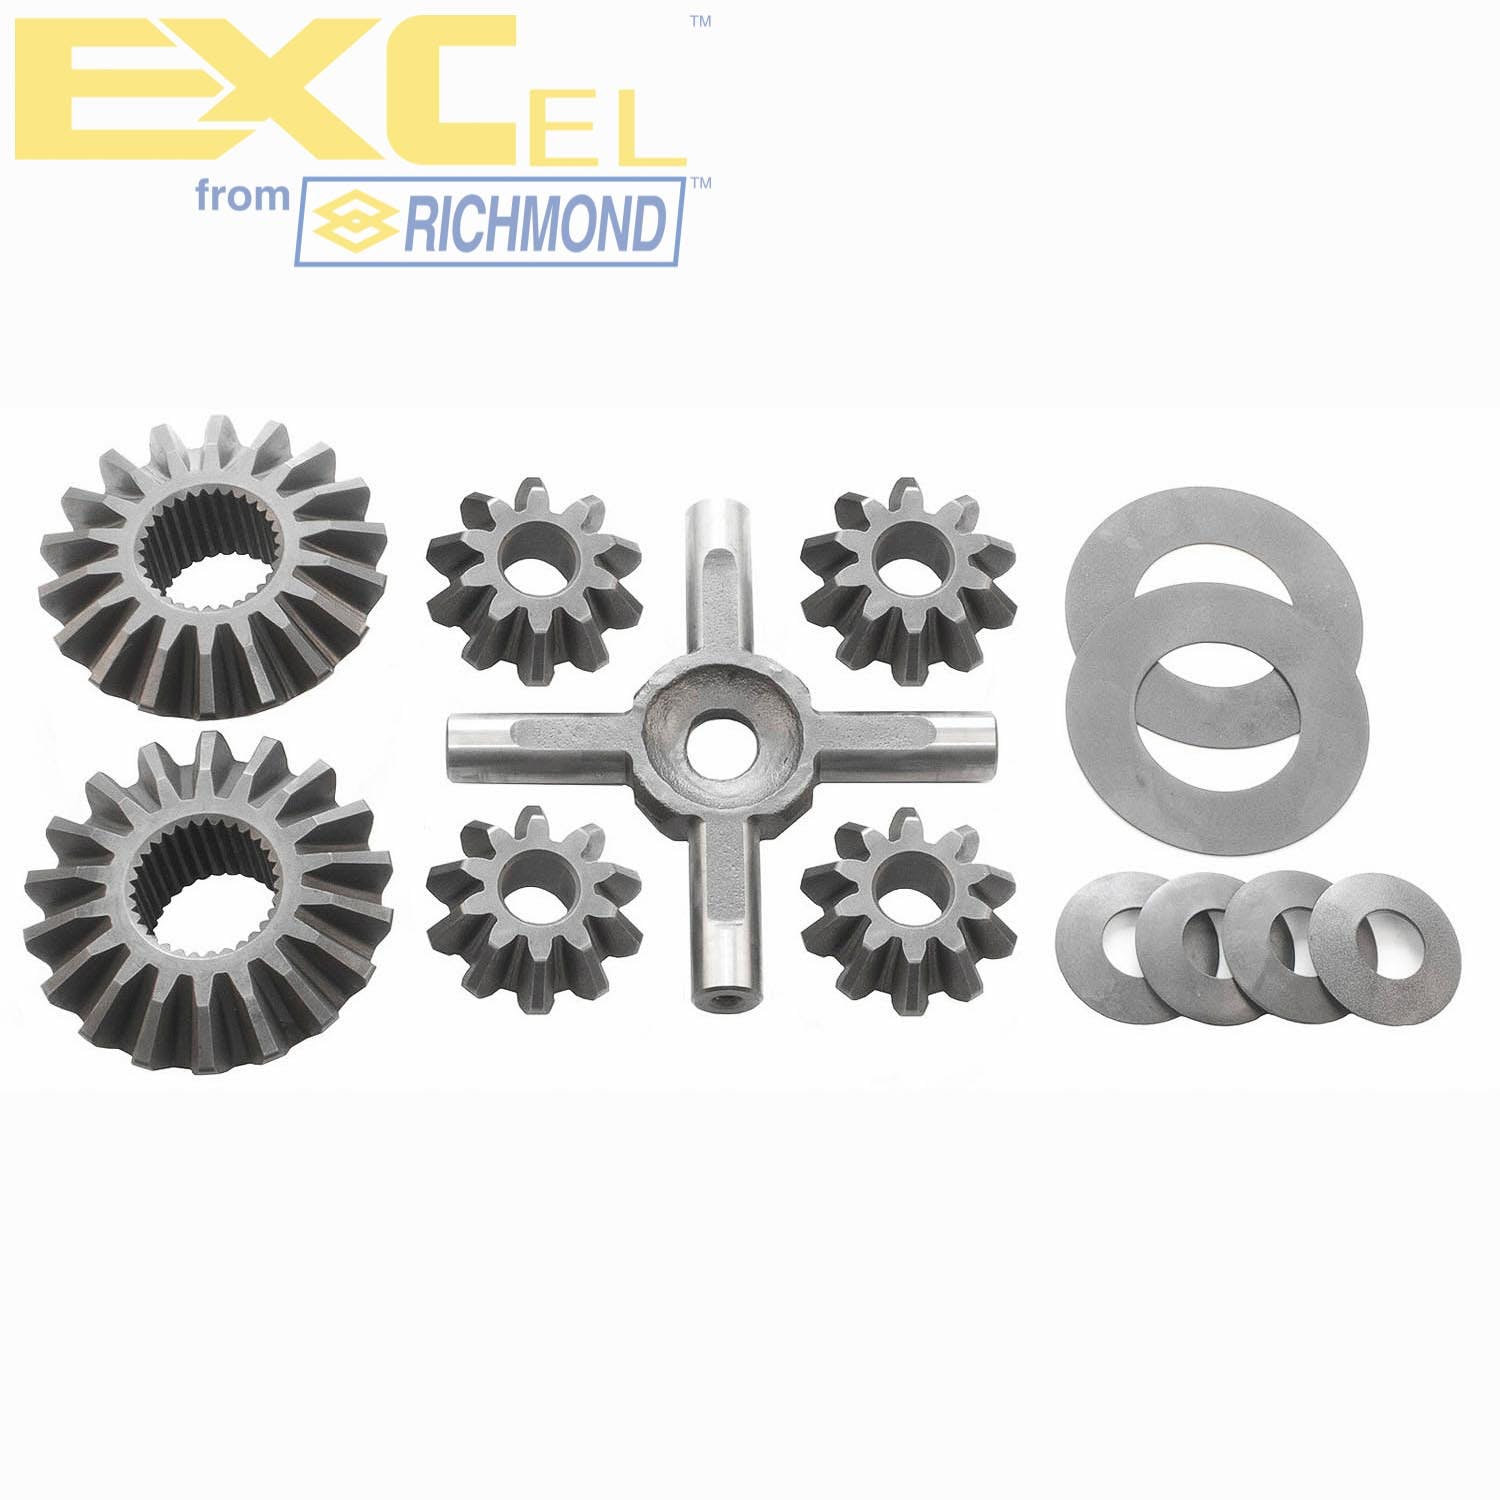 Excel XL-4062 Differential Carrier Gear Kit